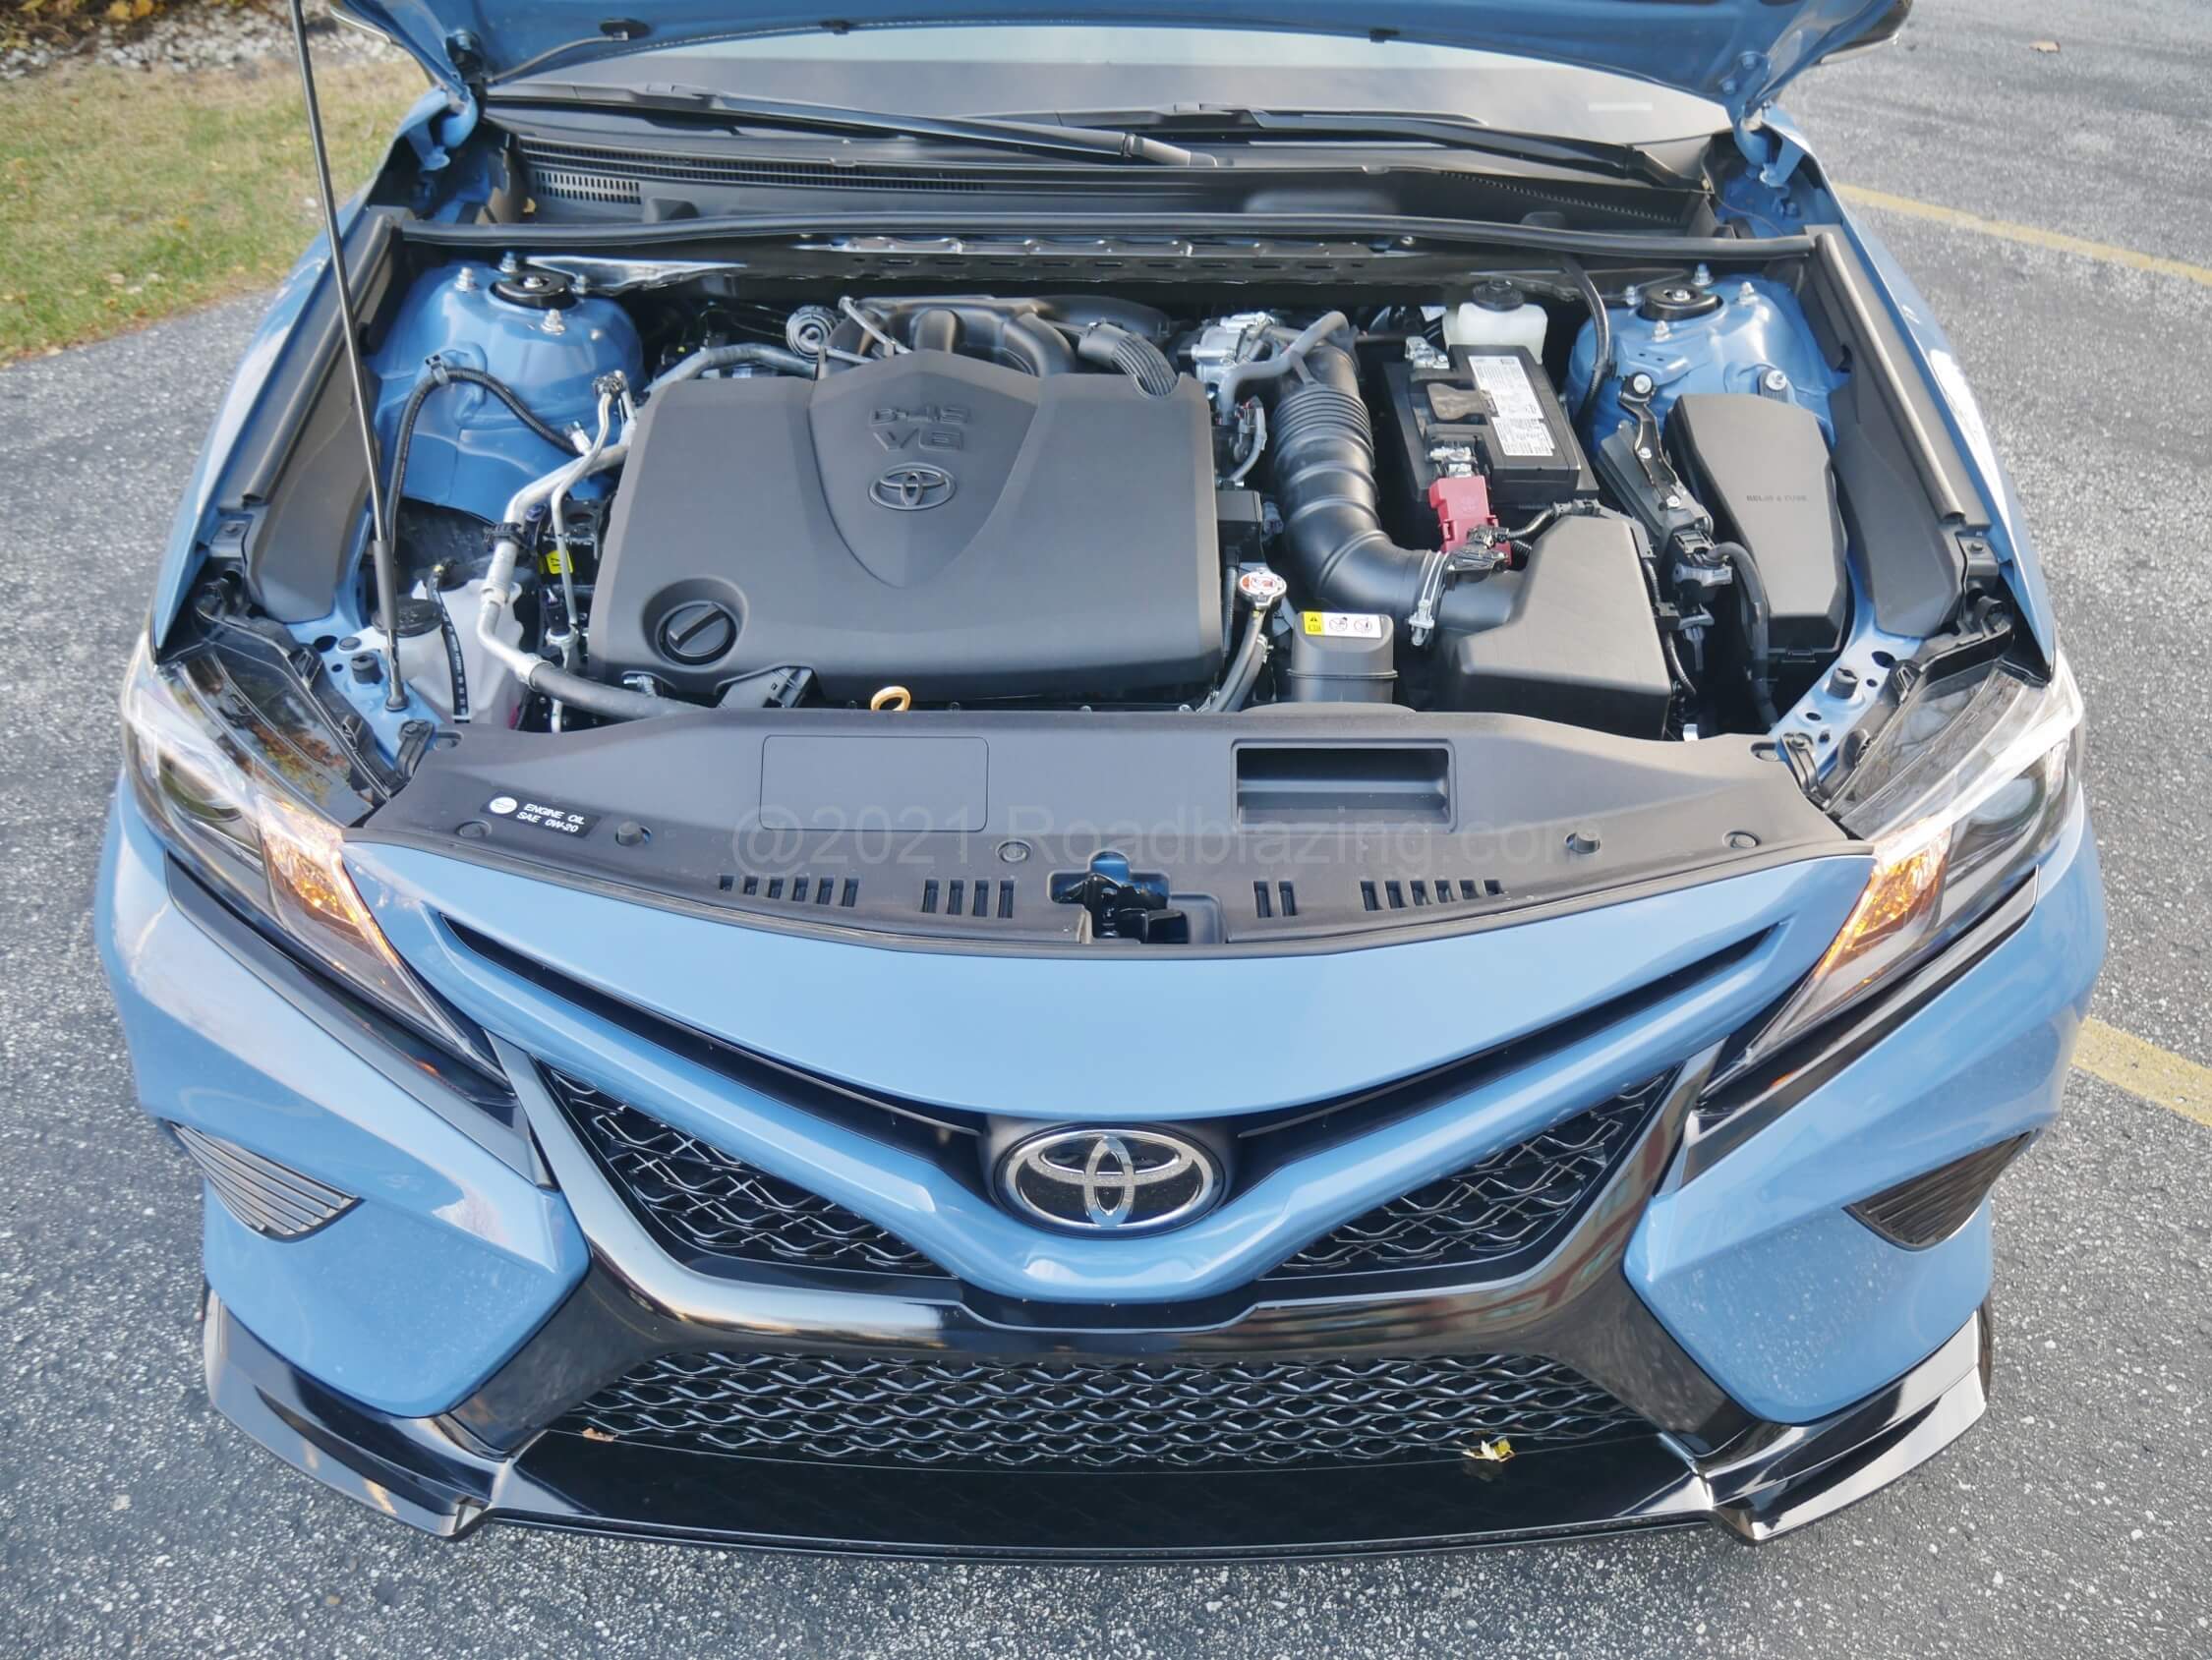 2022 Toyota Camry TRD: Free revving to well above 6200 rpm, making 301 hp, delivering solid 25 mpg